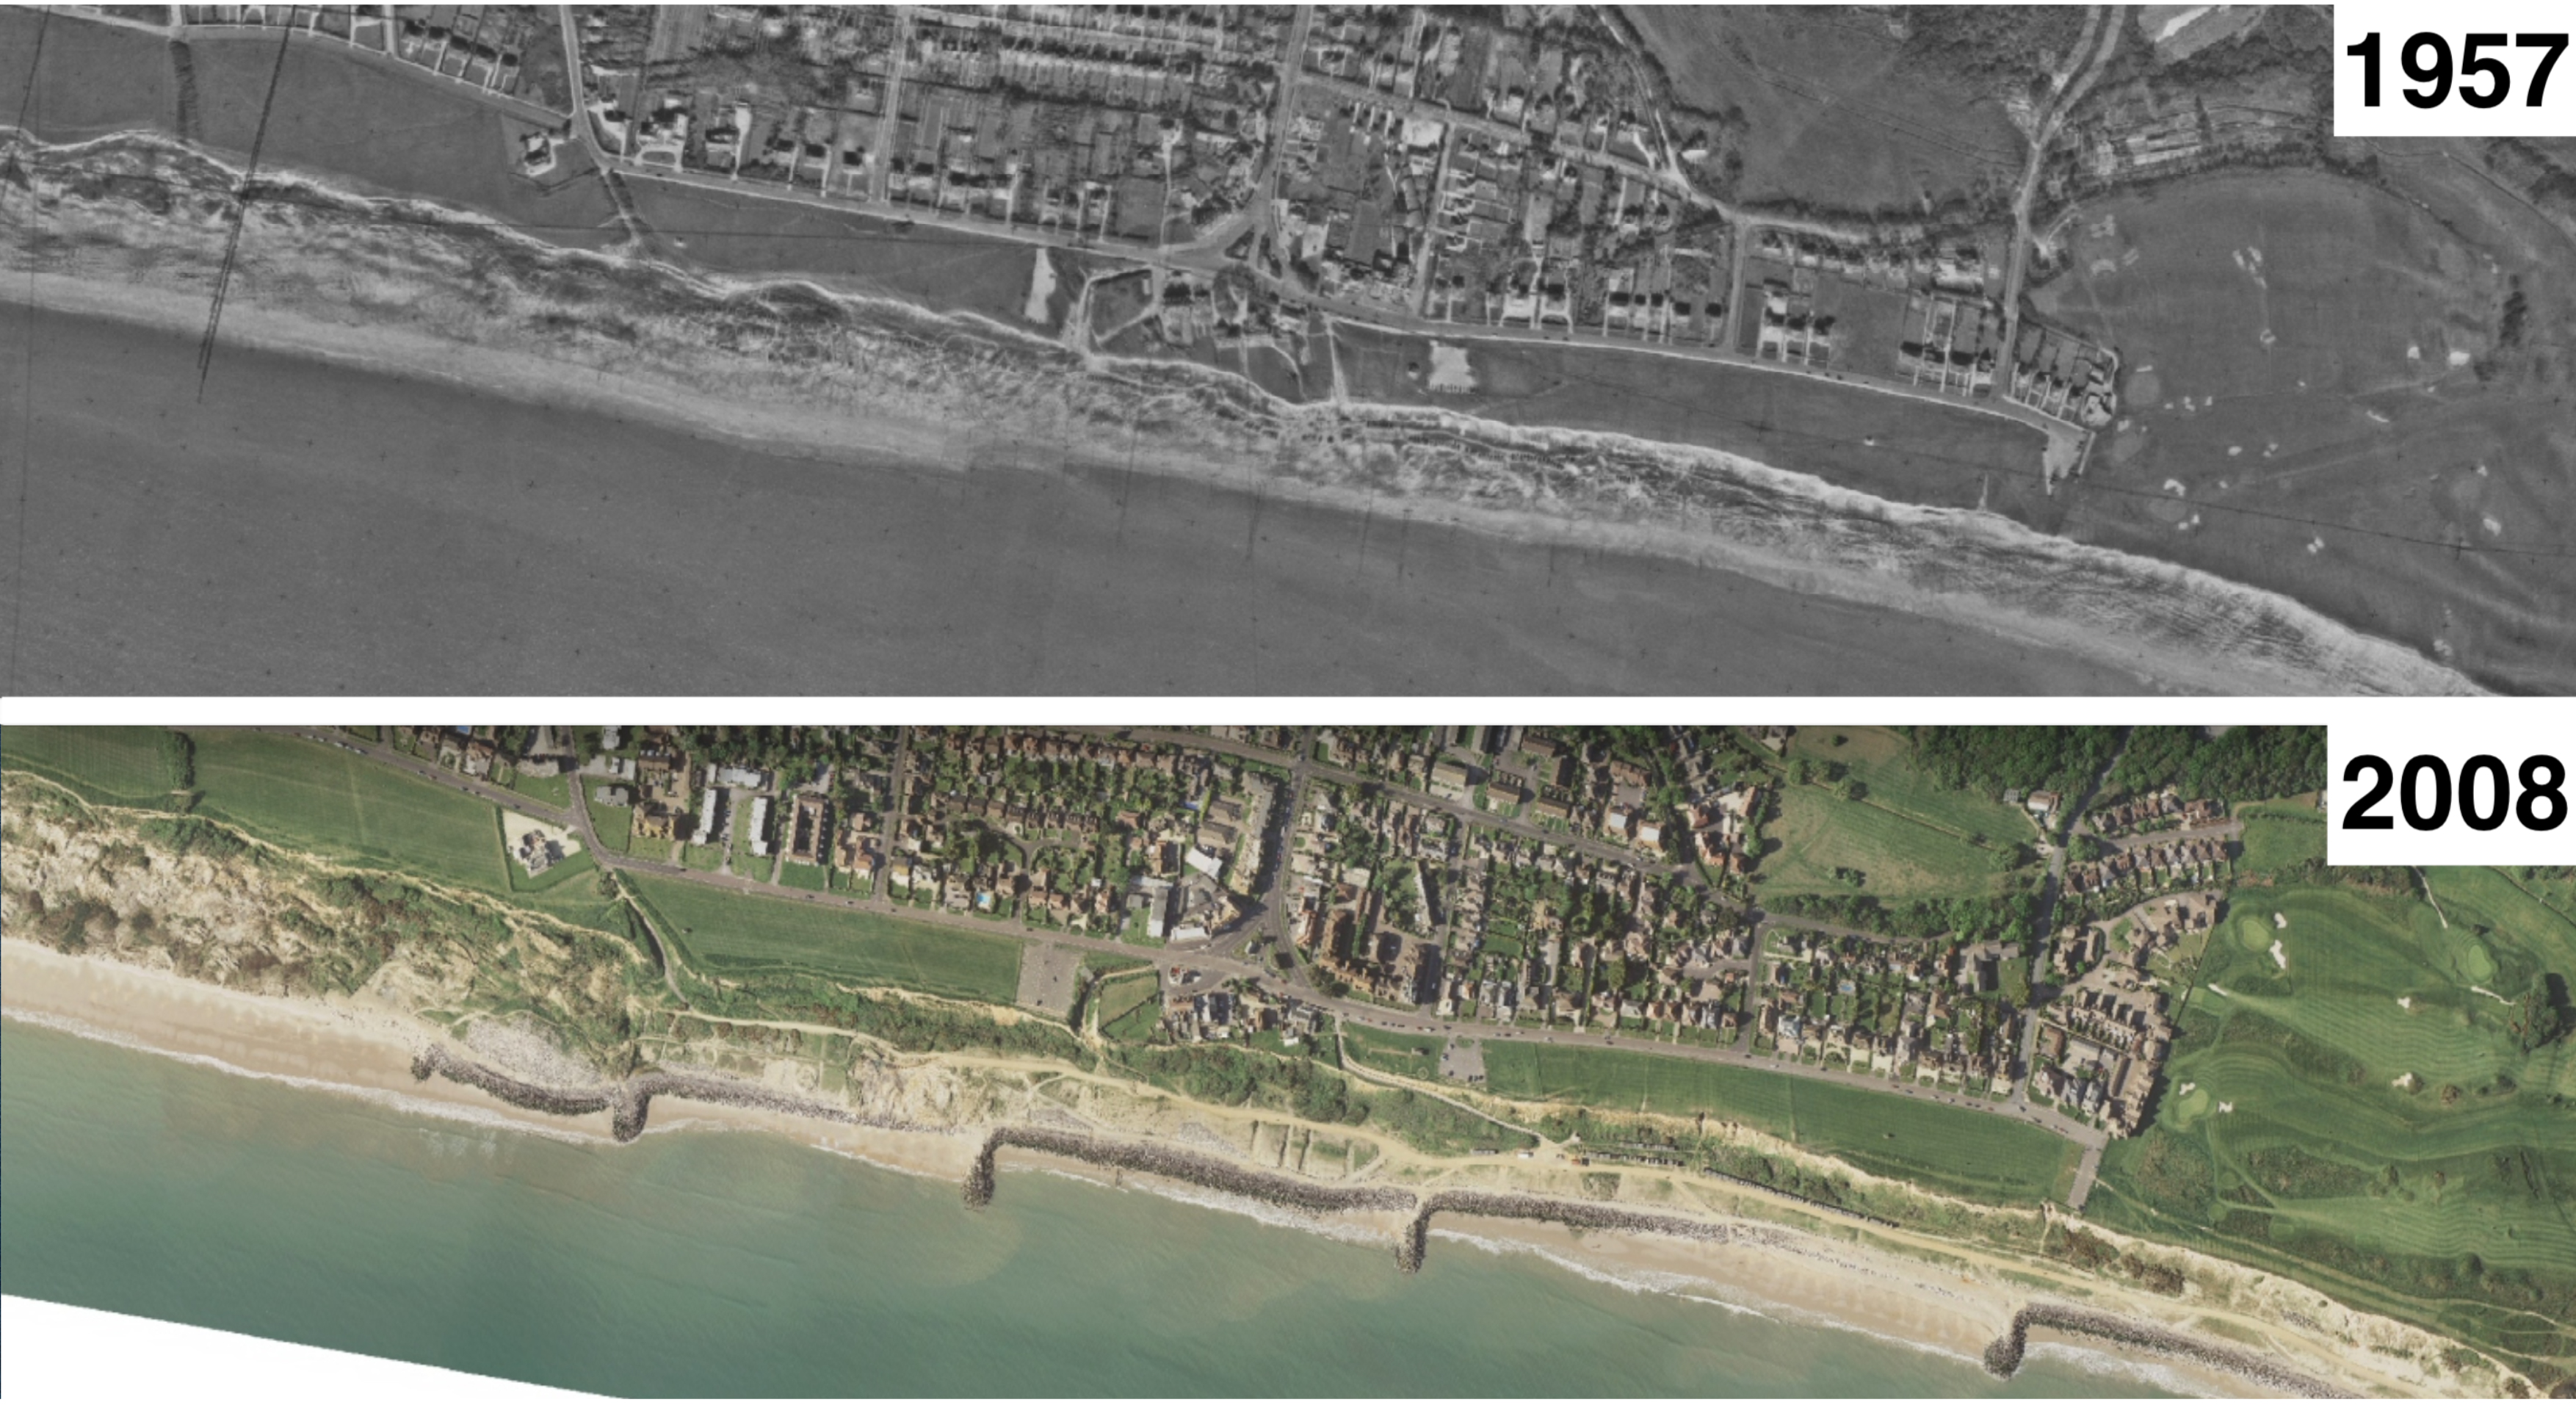 Figure 8.
Air photography demonstrating the uneven erosion of one section of the Barton on Sea cliff line and the stone groynes.
Provided by New Forest District Council.